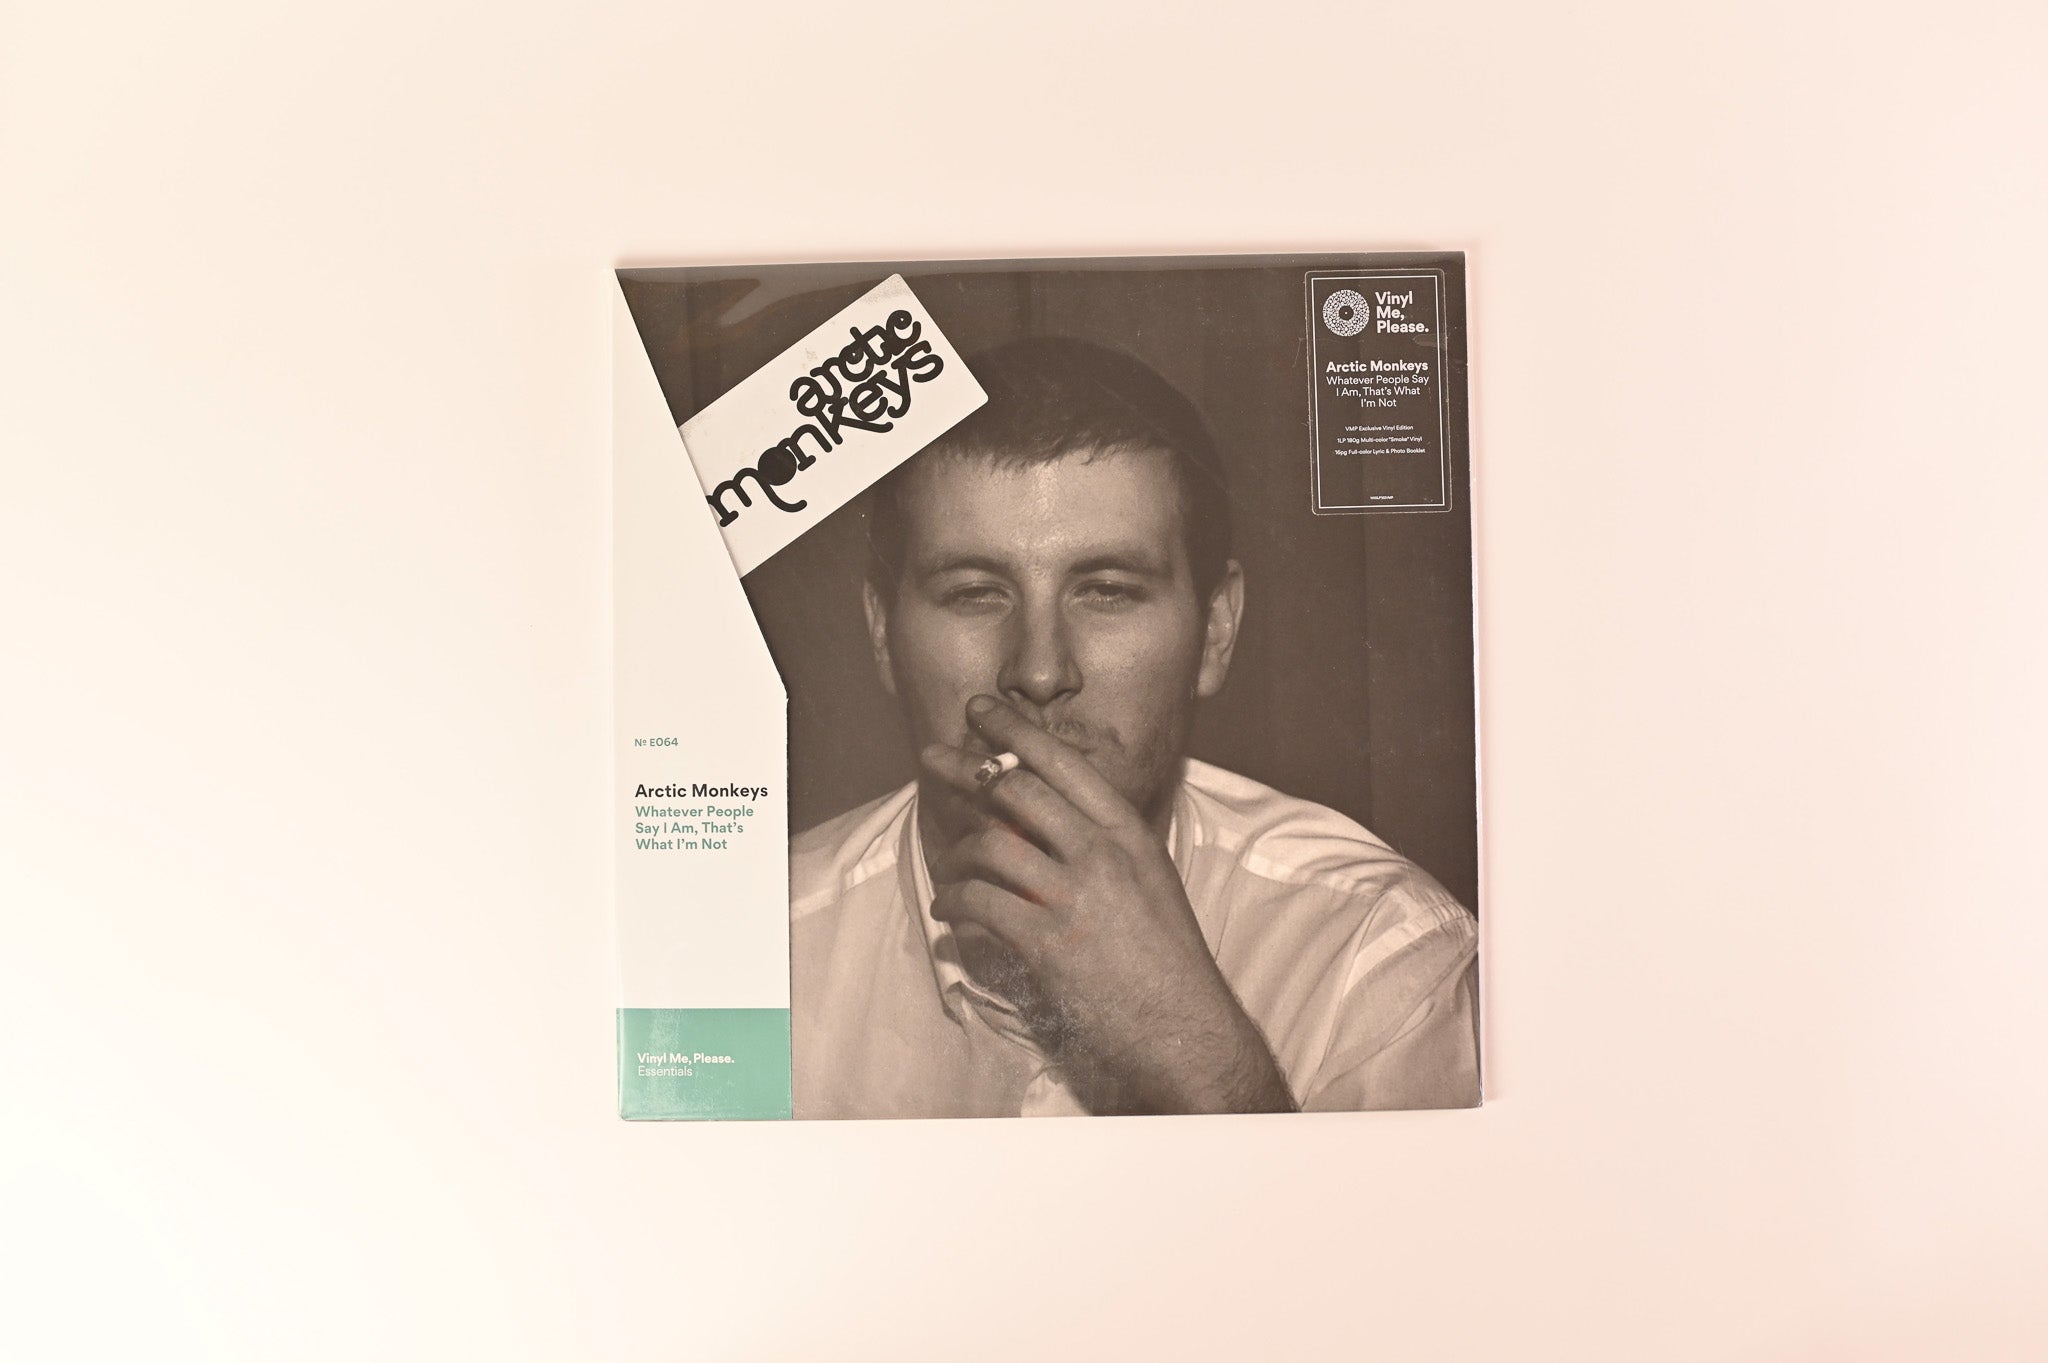 Arctic Monkeys - Whatever People Say I Am, That's What I'm Not on Domino Gray w/Black Smoke Reissue